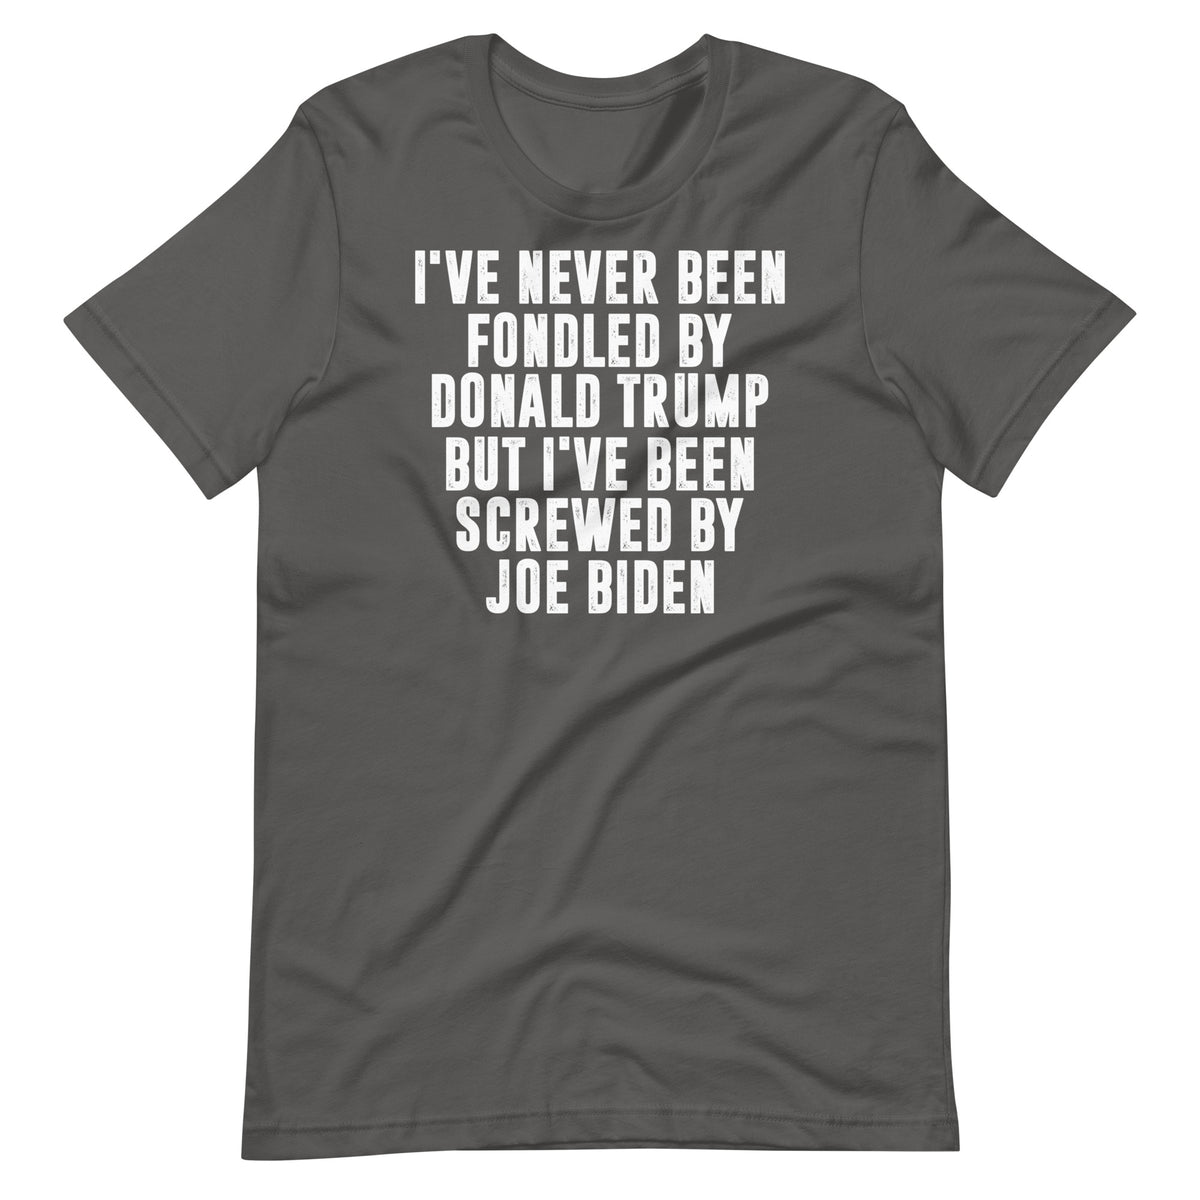 BELLA + CANVAS BRAND - I've Never Been Fondled by Donald Trump